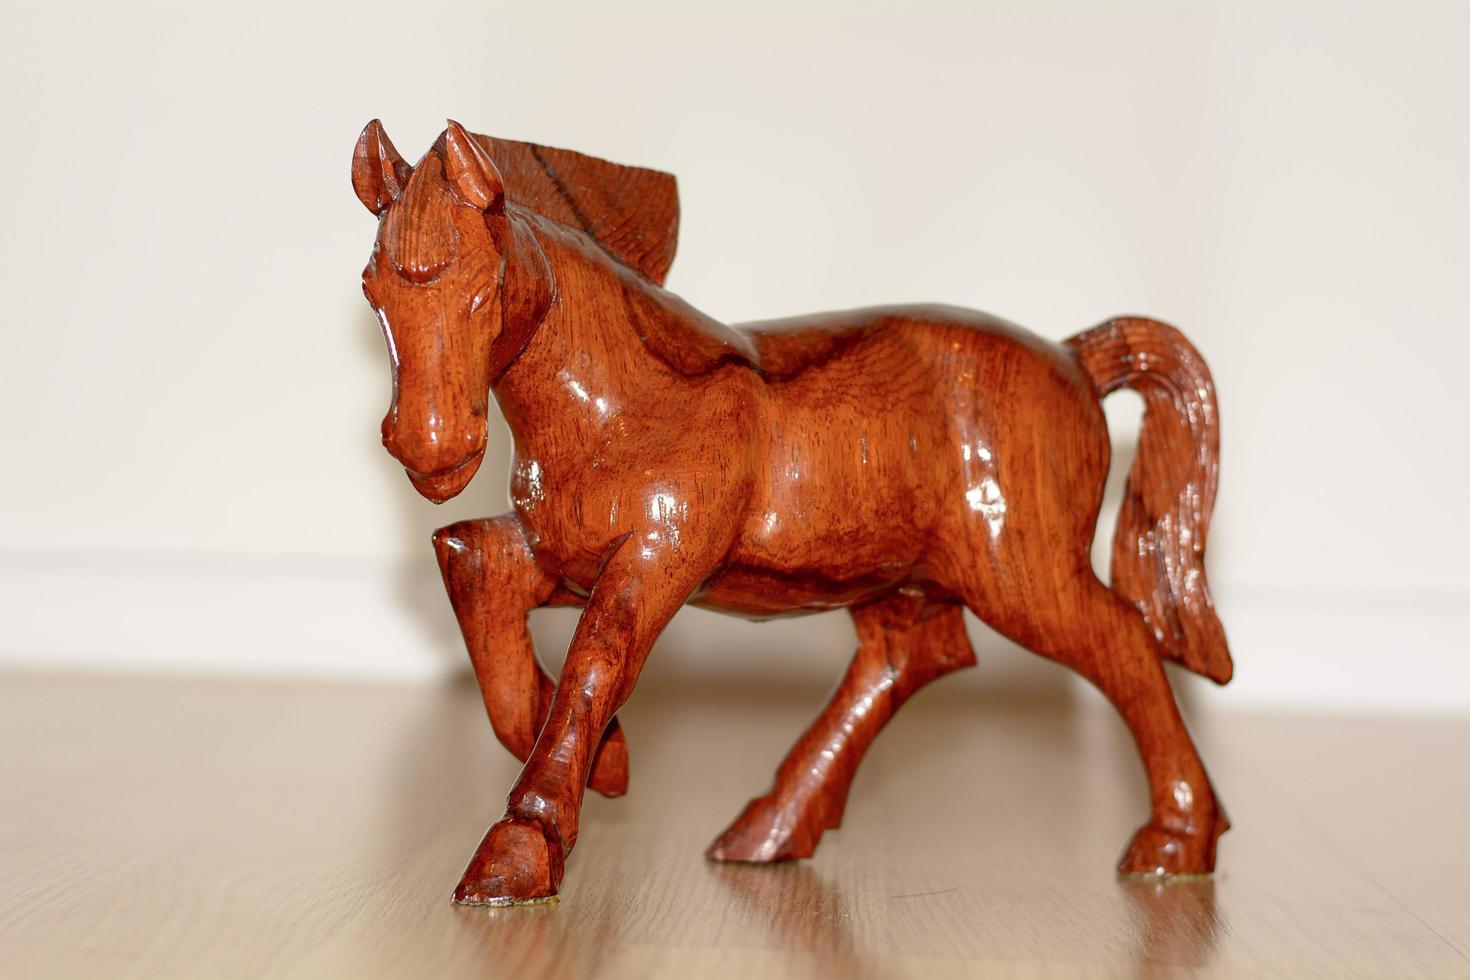 The wooden horse. It is a carving horse. photo